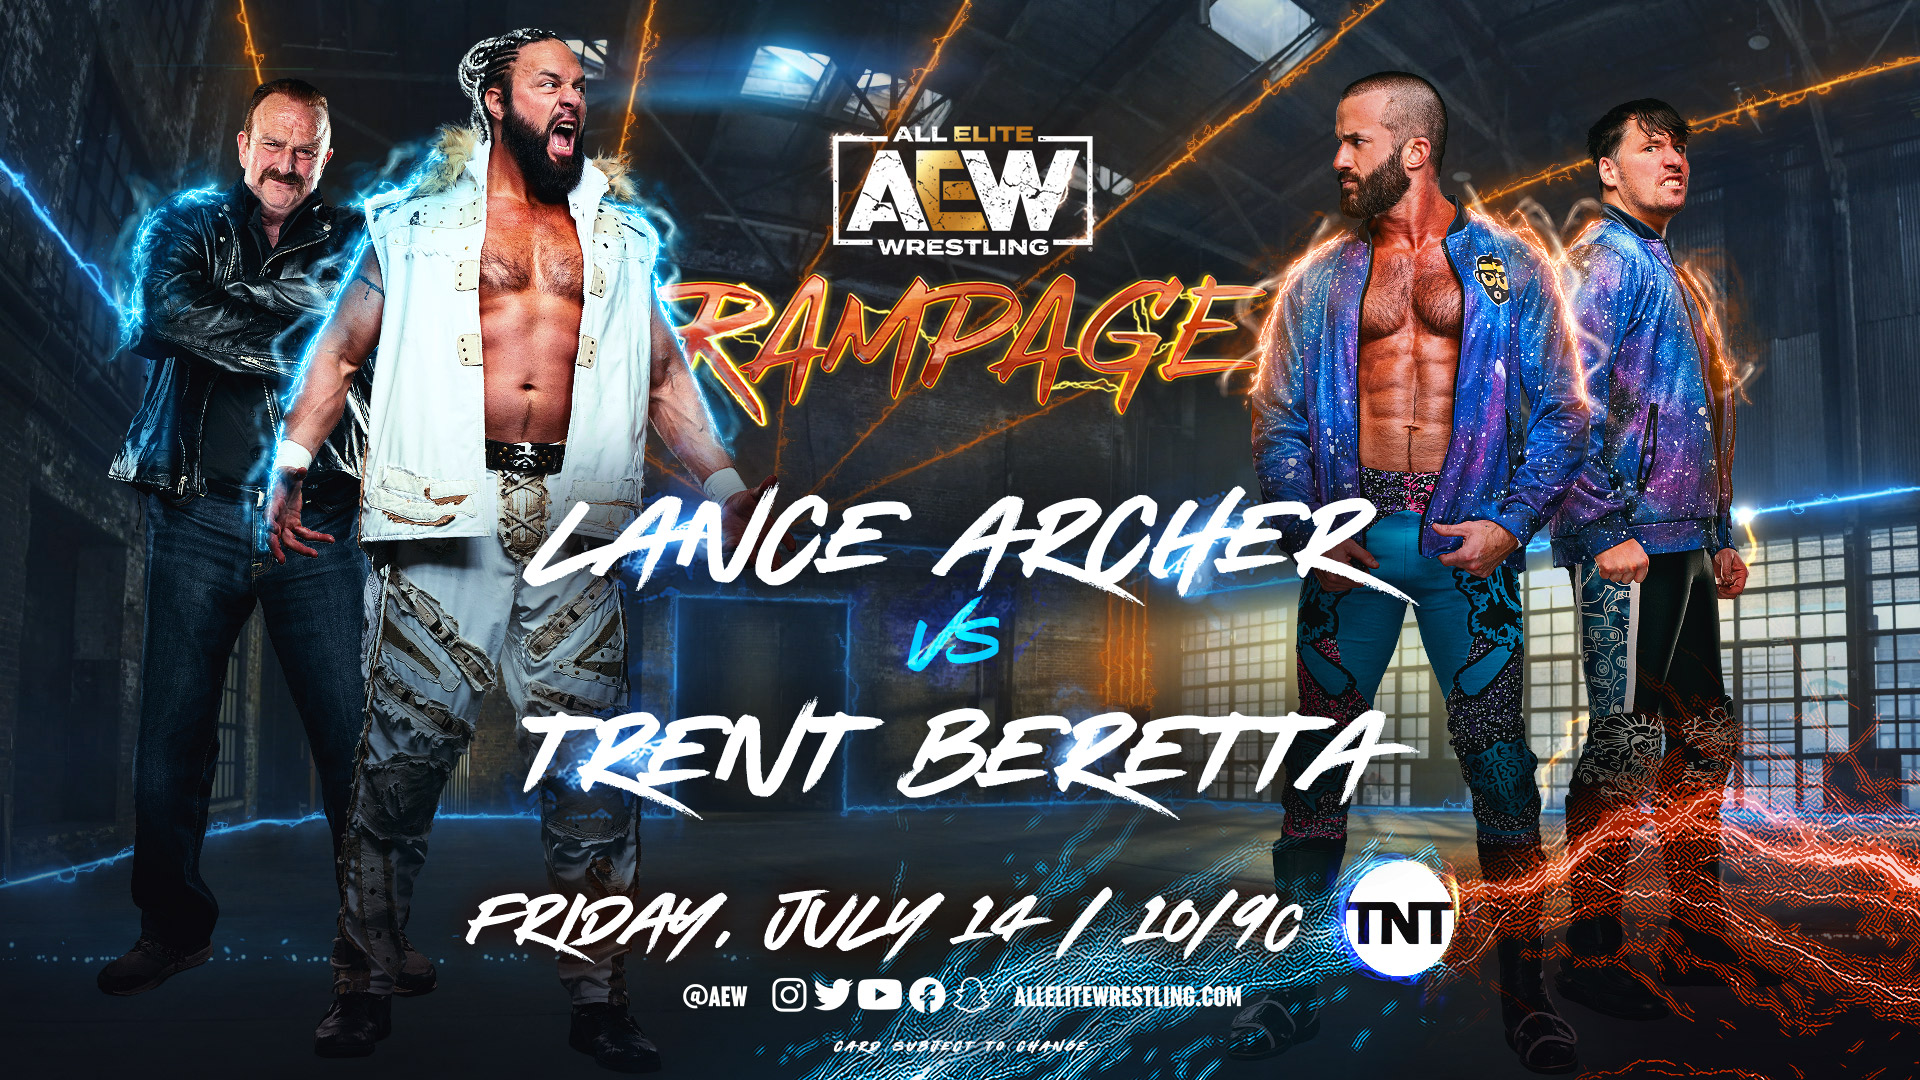 An AEW Rampage match graphic advertising the return of Lance Archer